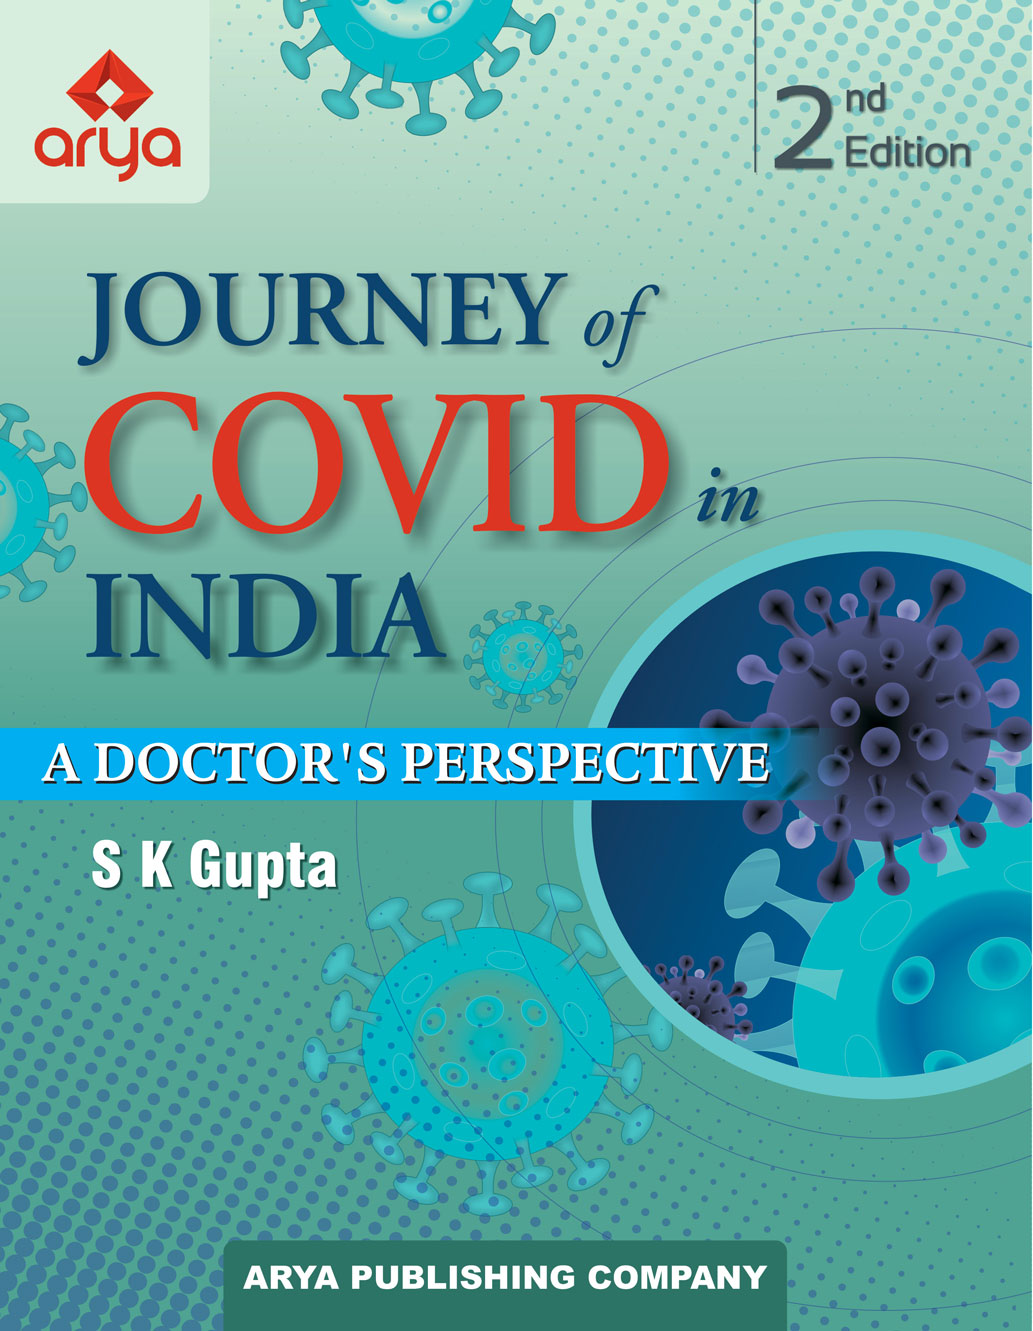 Journey of Covid in India